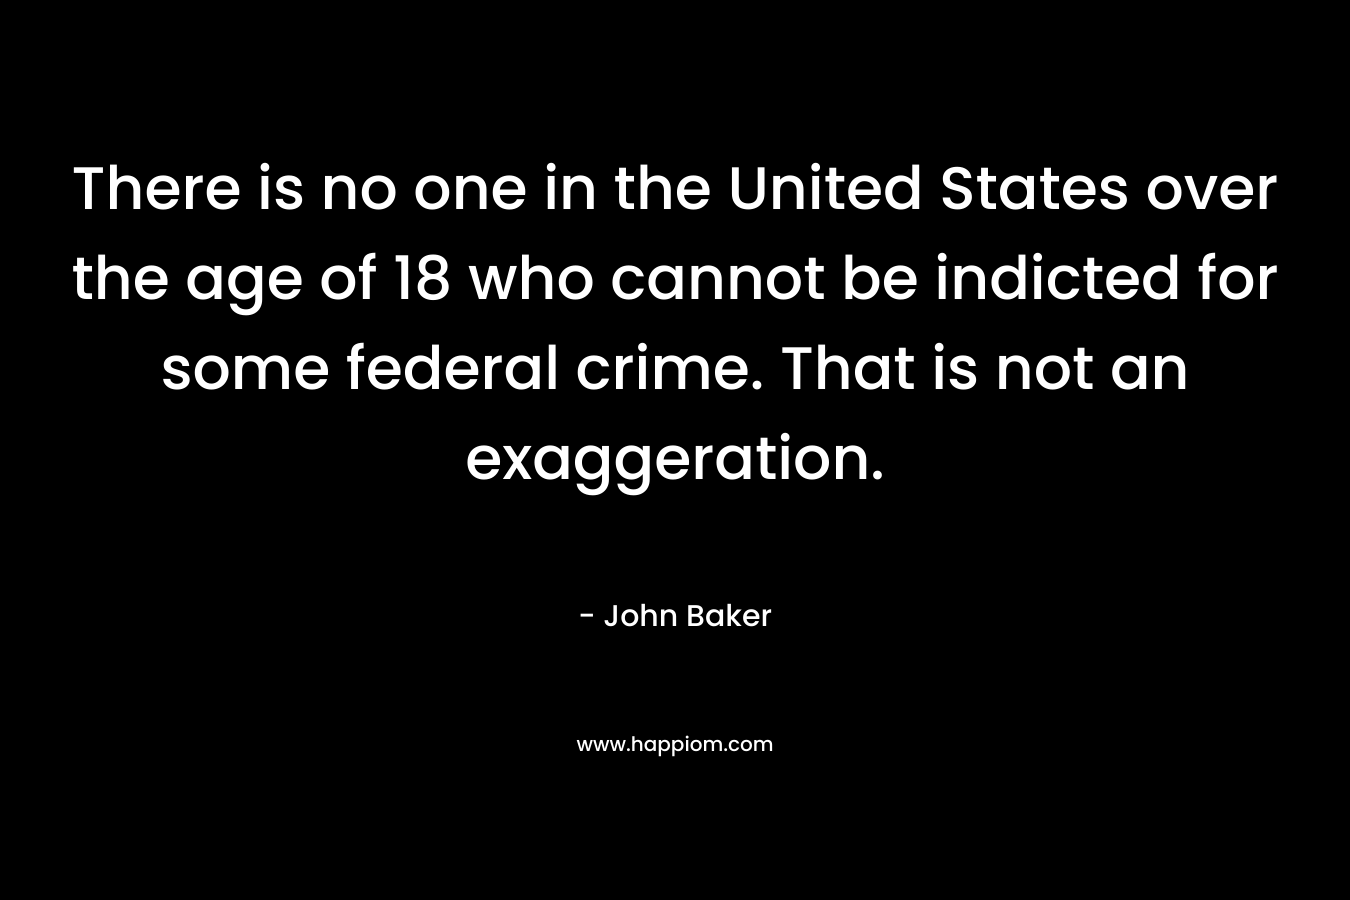 There is no one in the United States over the age of 18 who cannot be indicted for some federal crime. That is not an exaggeration.